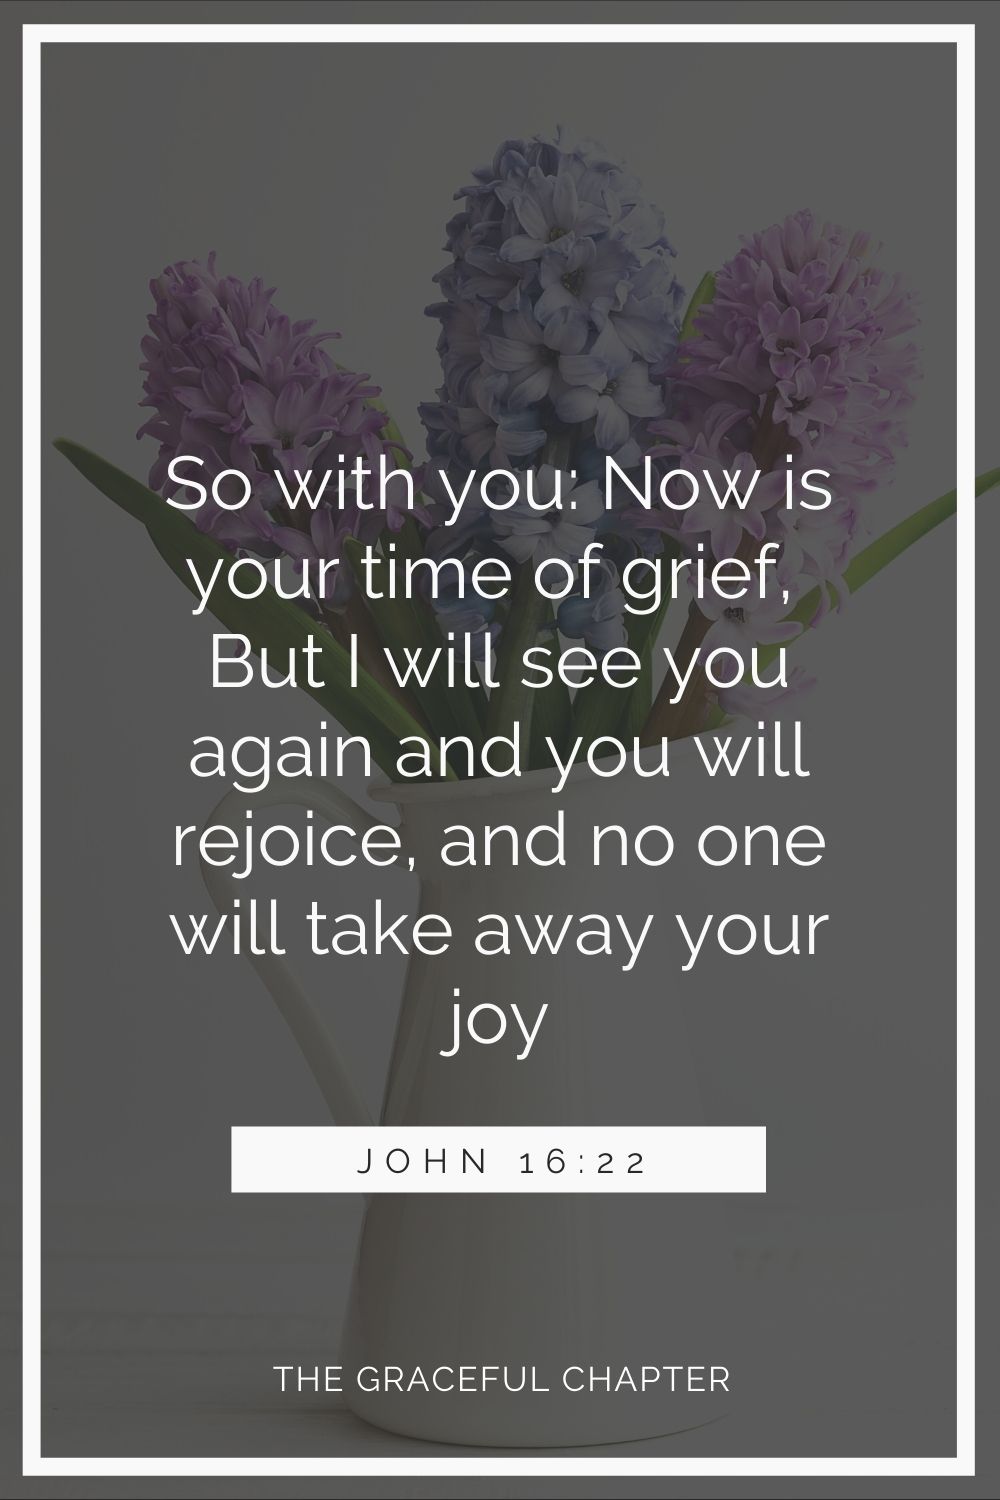 So with you: Now is your time of grief, but I will see you again and you will rejoice, and no one will take away your joy.  John 16:22